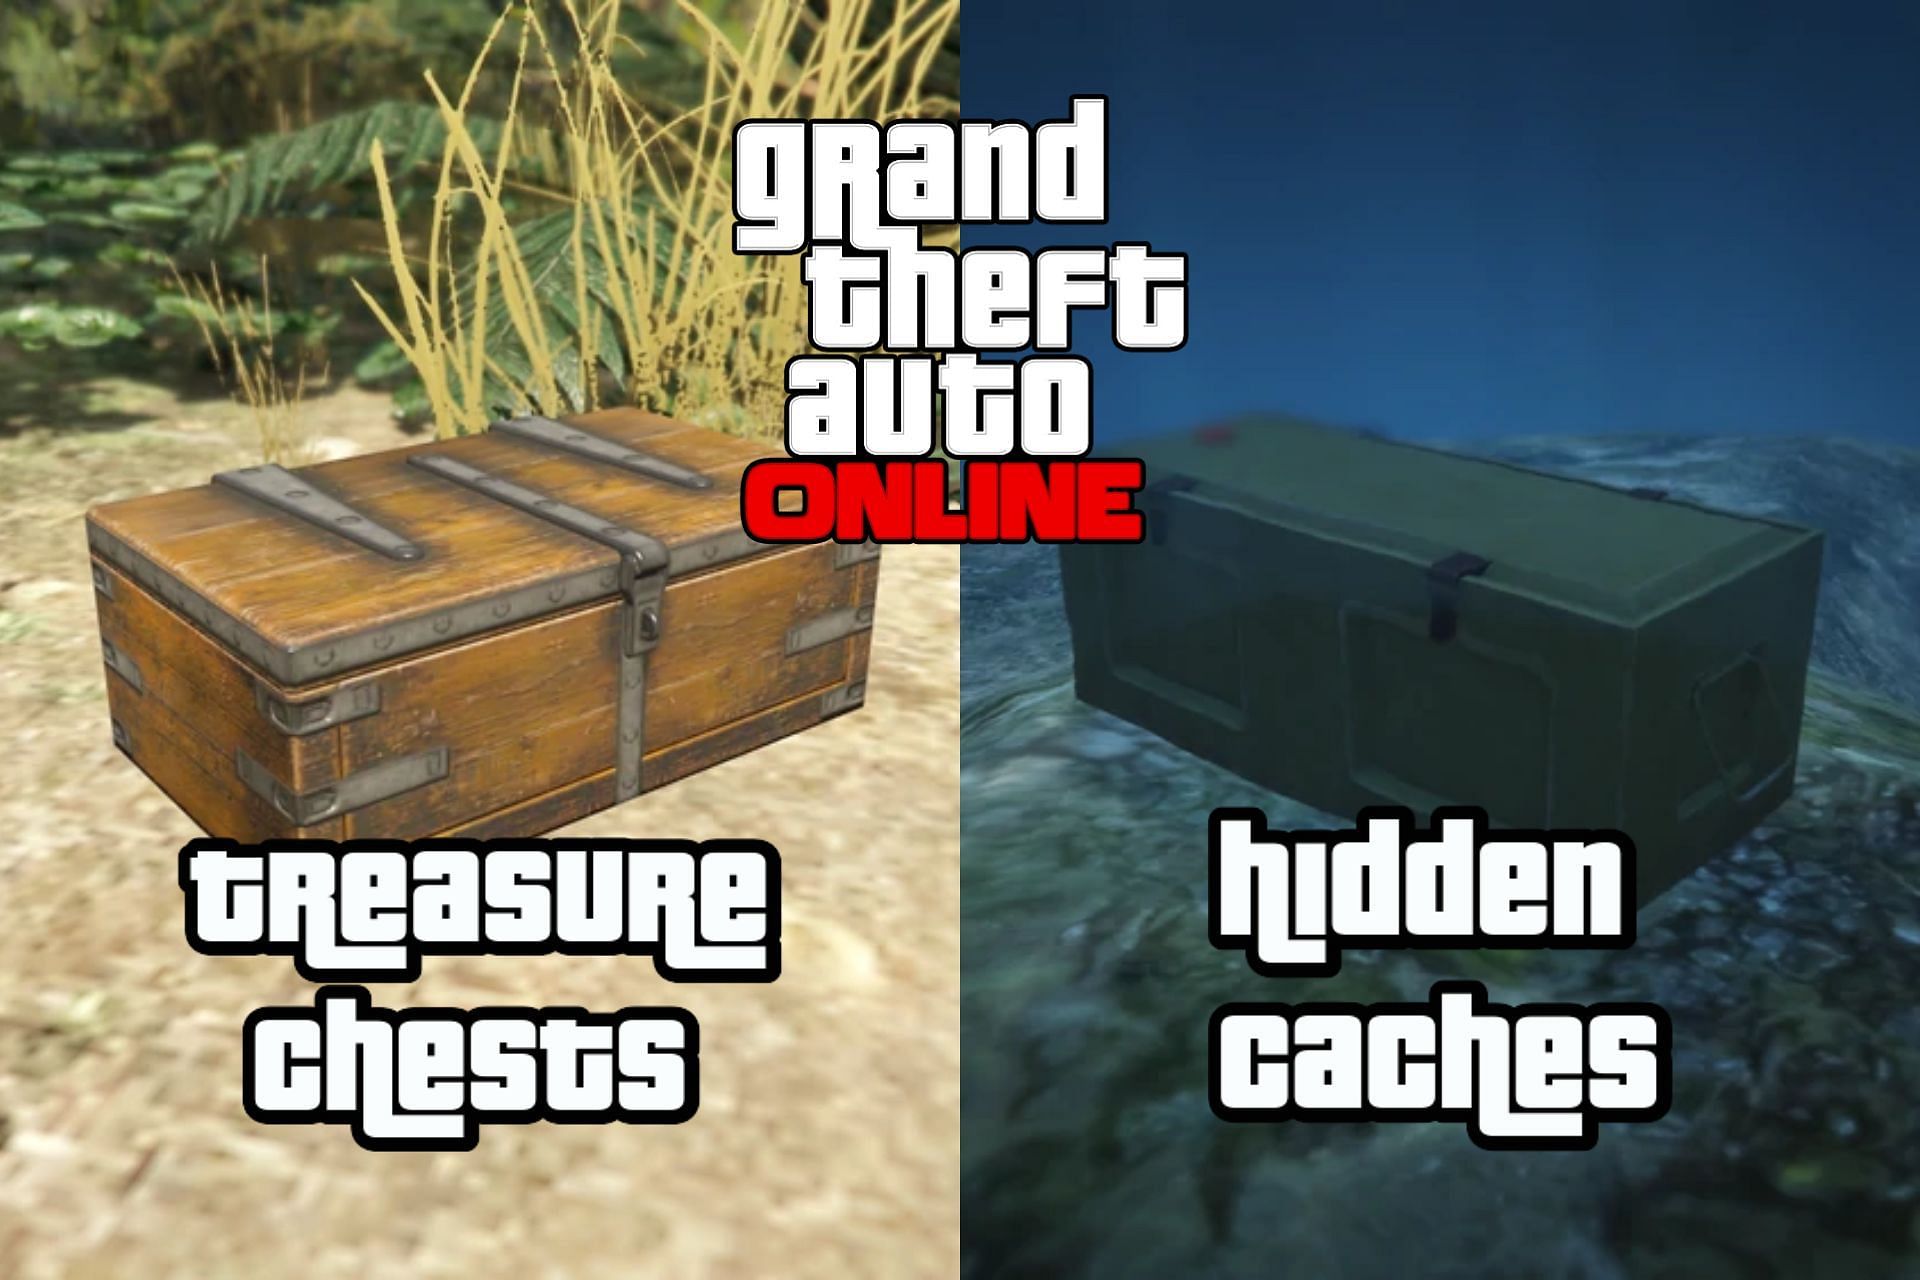 Follow these steps to easily find the treasure chests and hidden caches in GTA Online (Images via GTA Fandom)